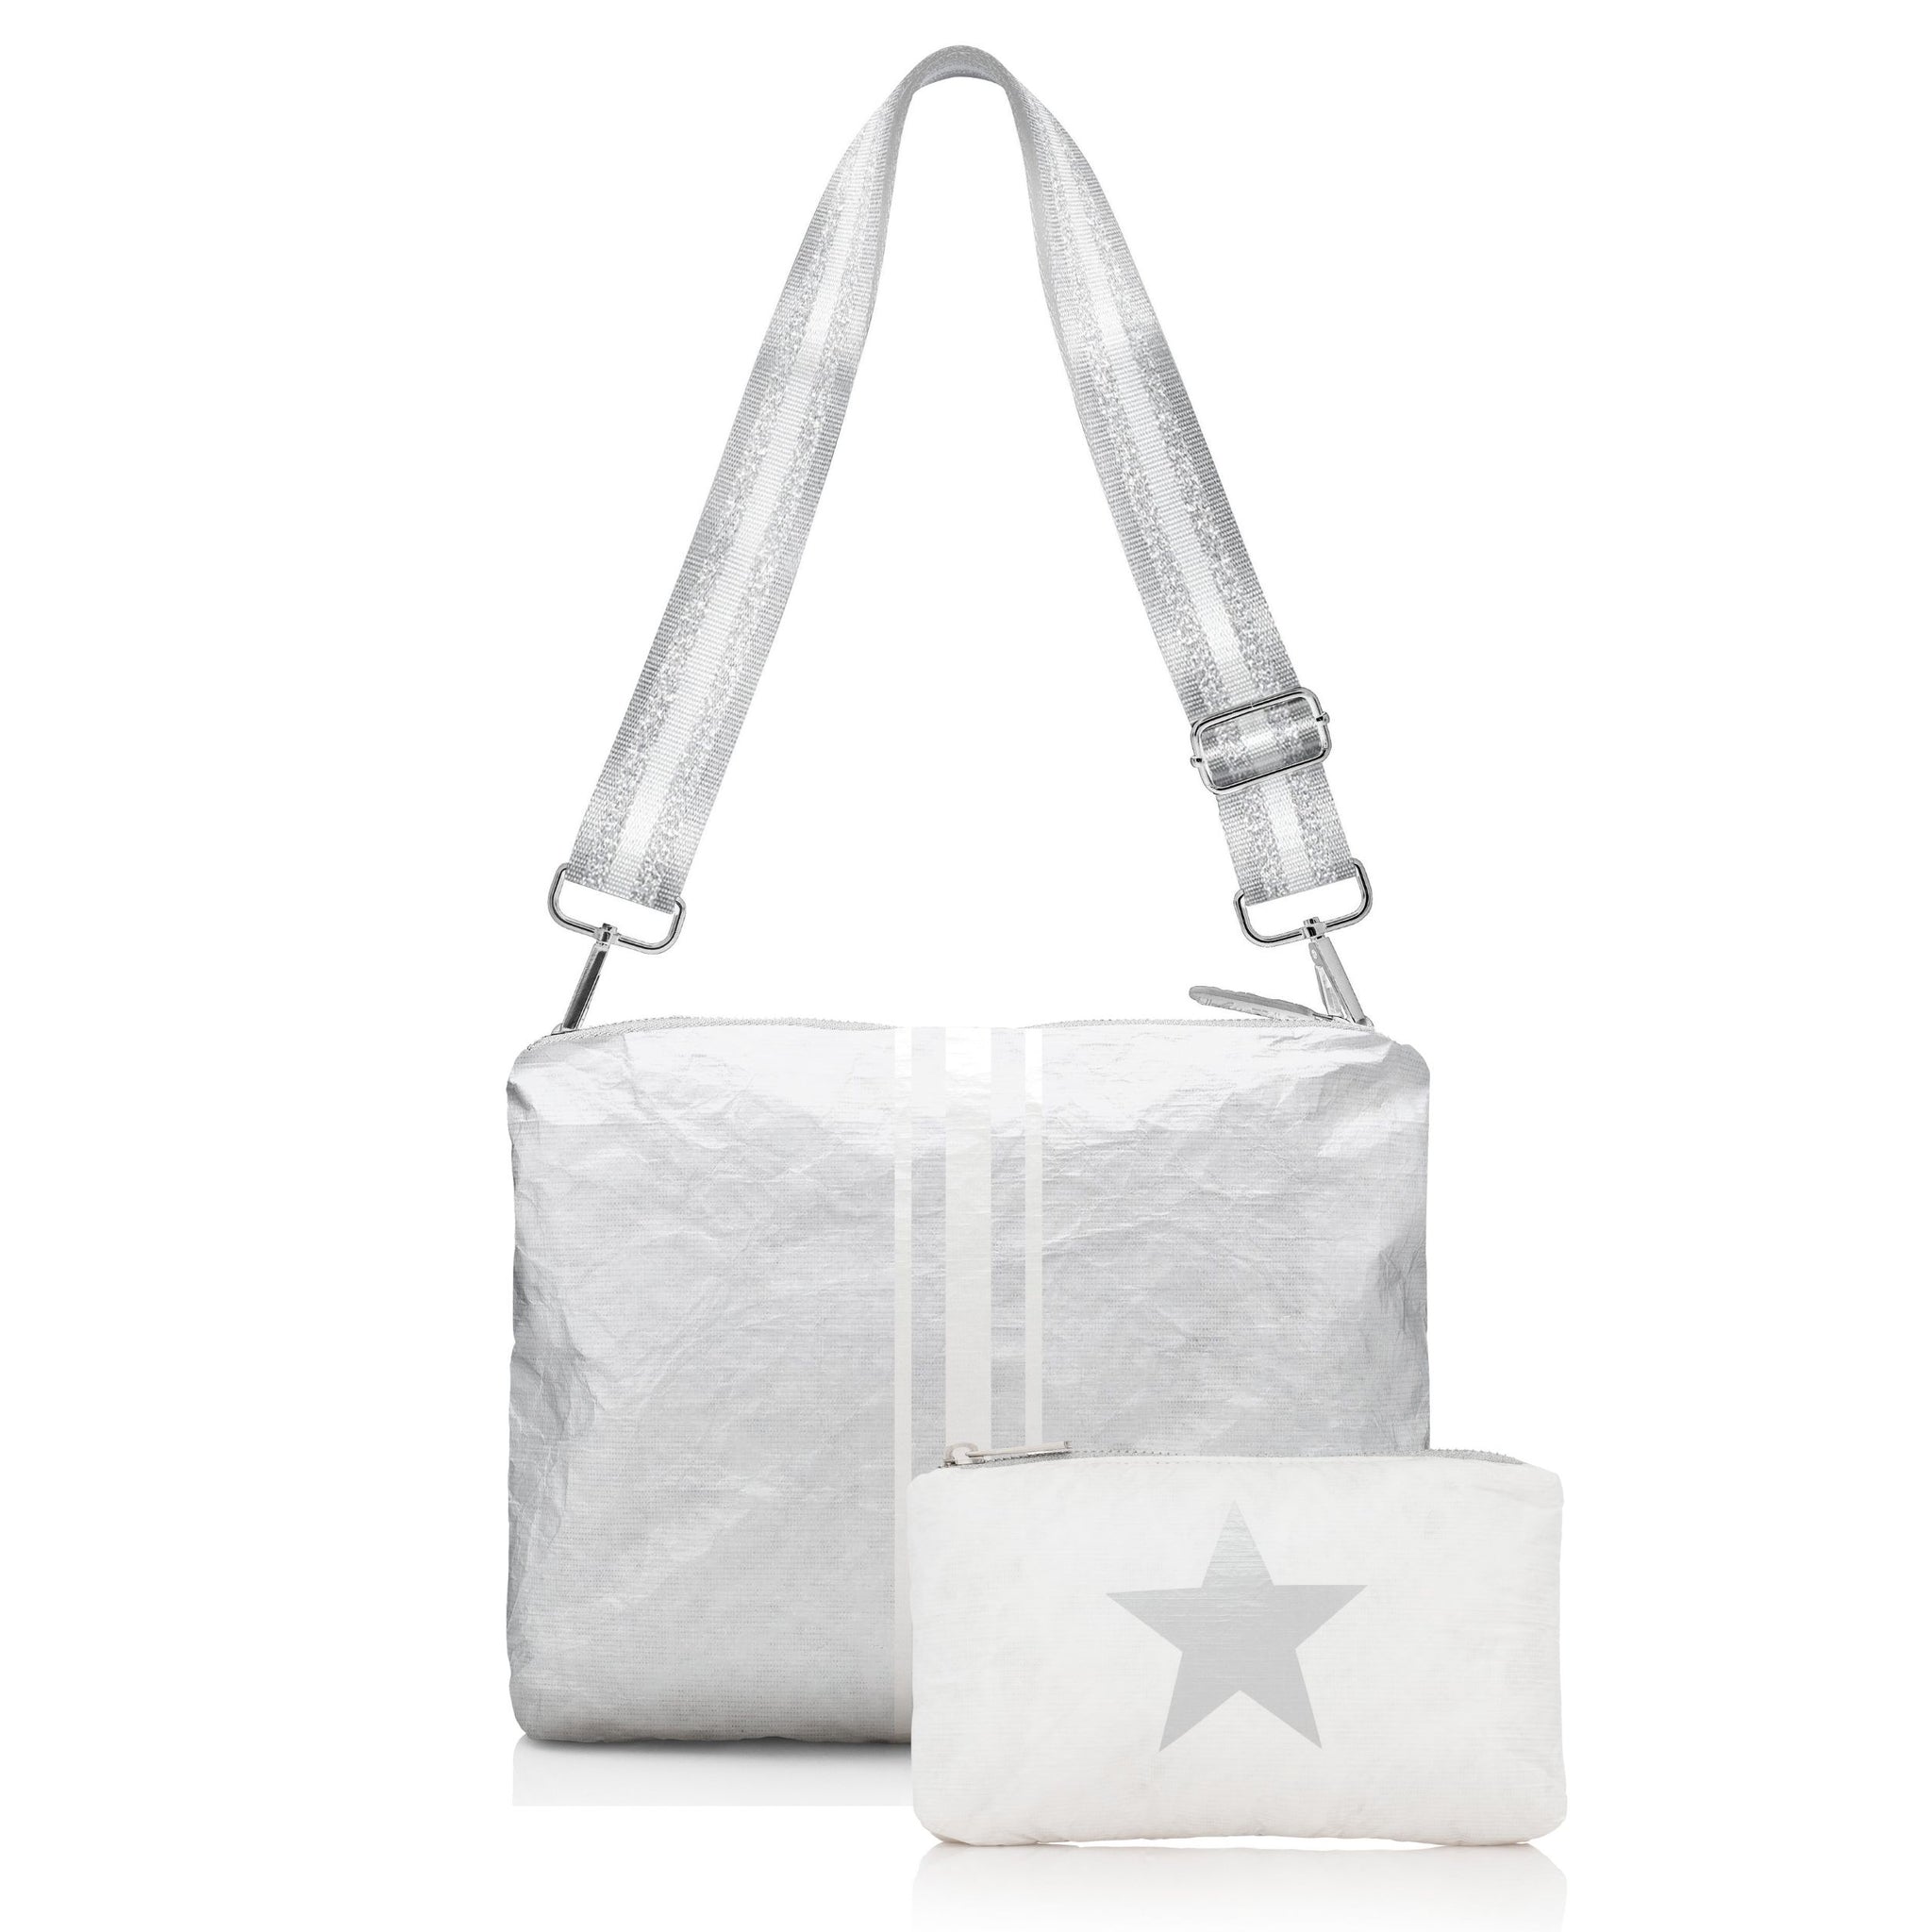 Everyday Purse Essentials Two Pack - Silver and Shimmer White